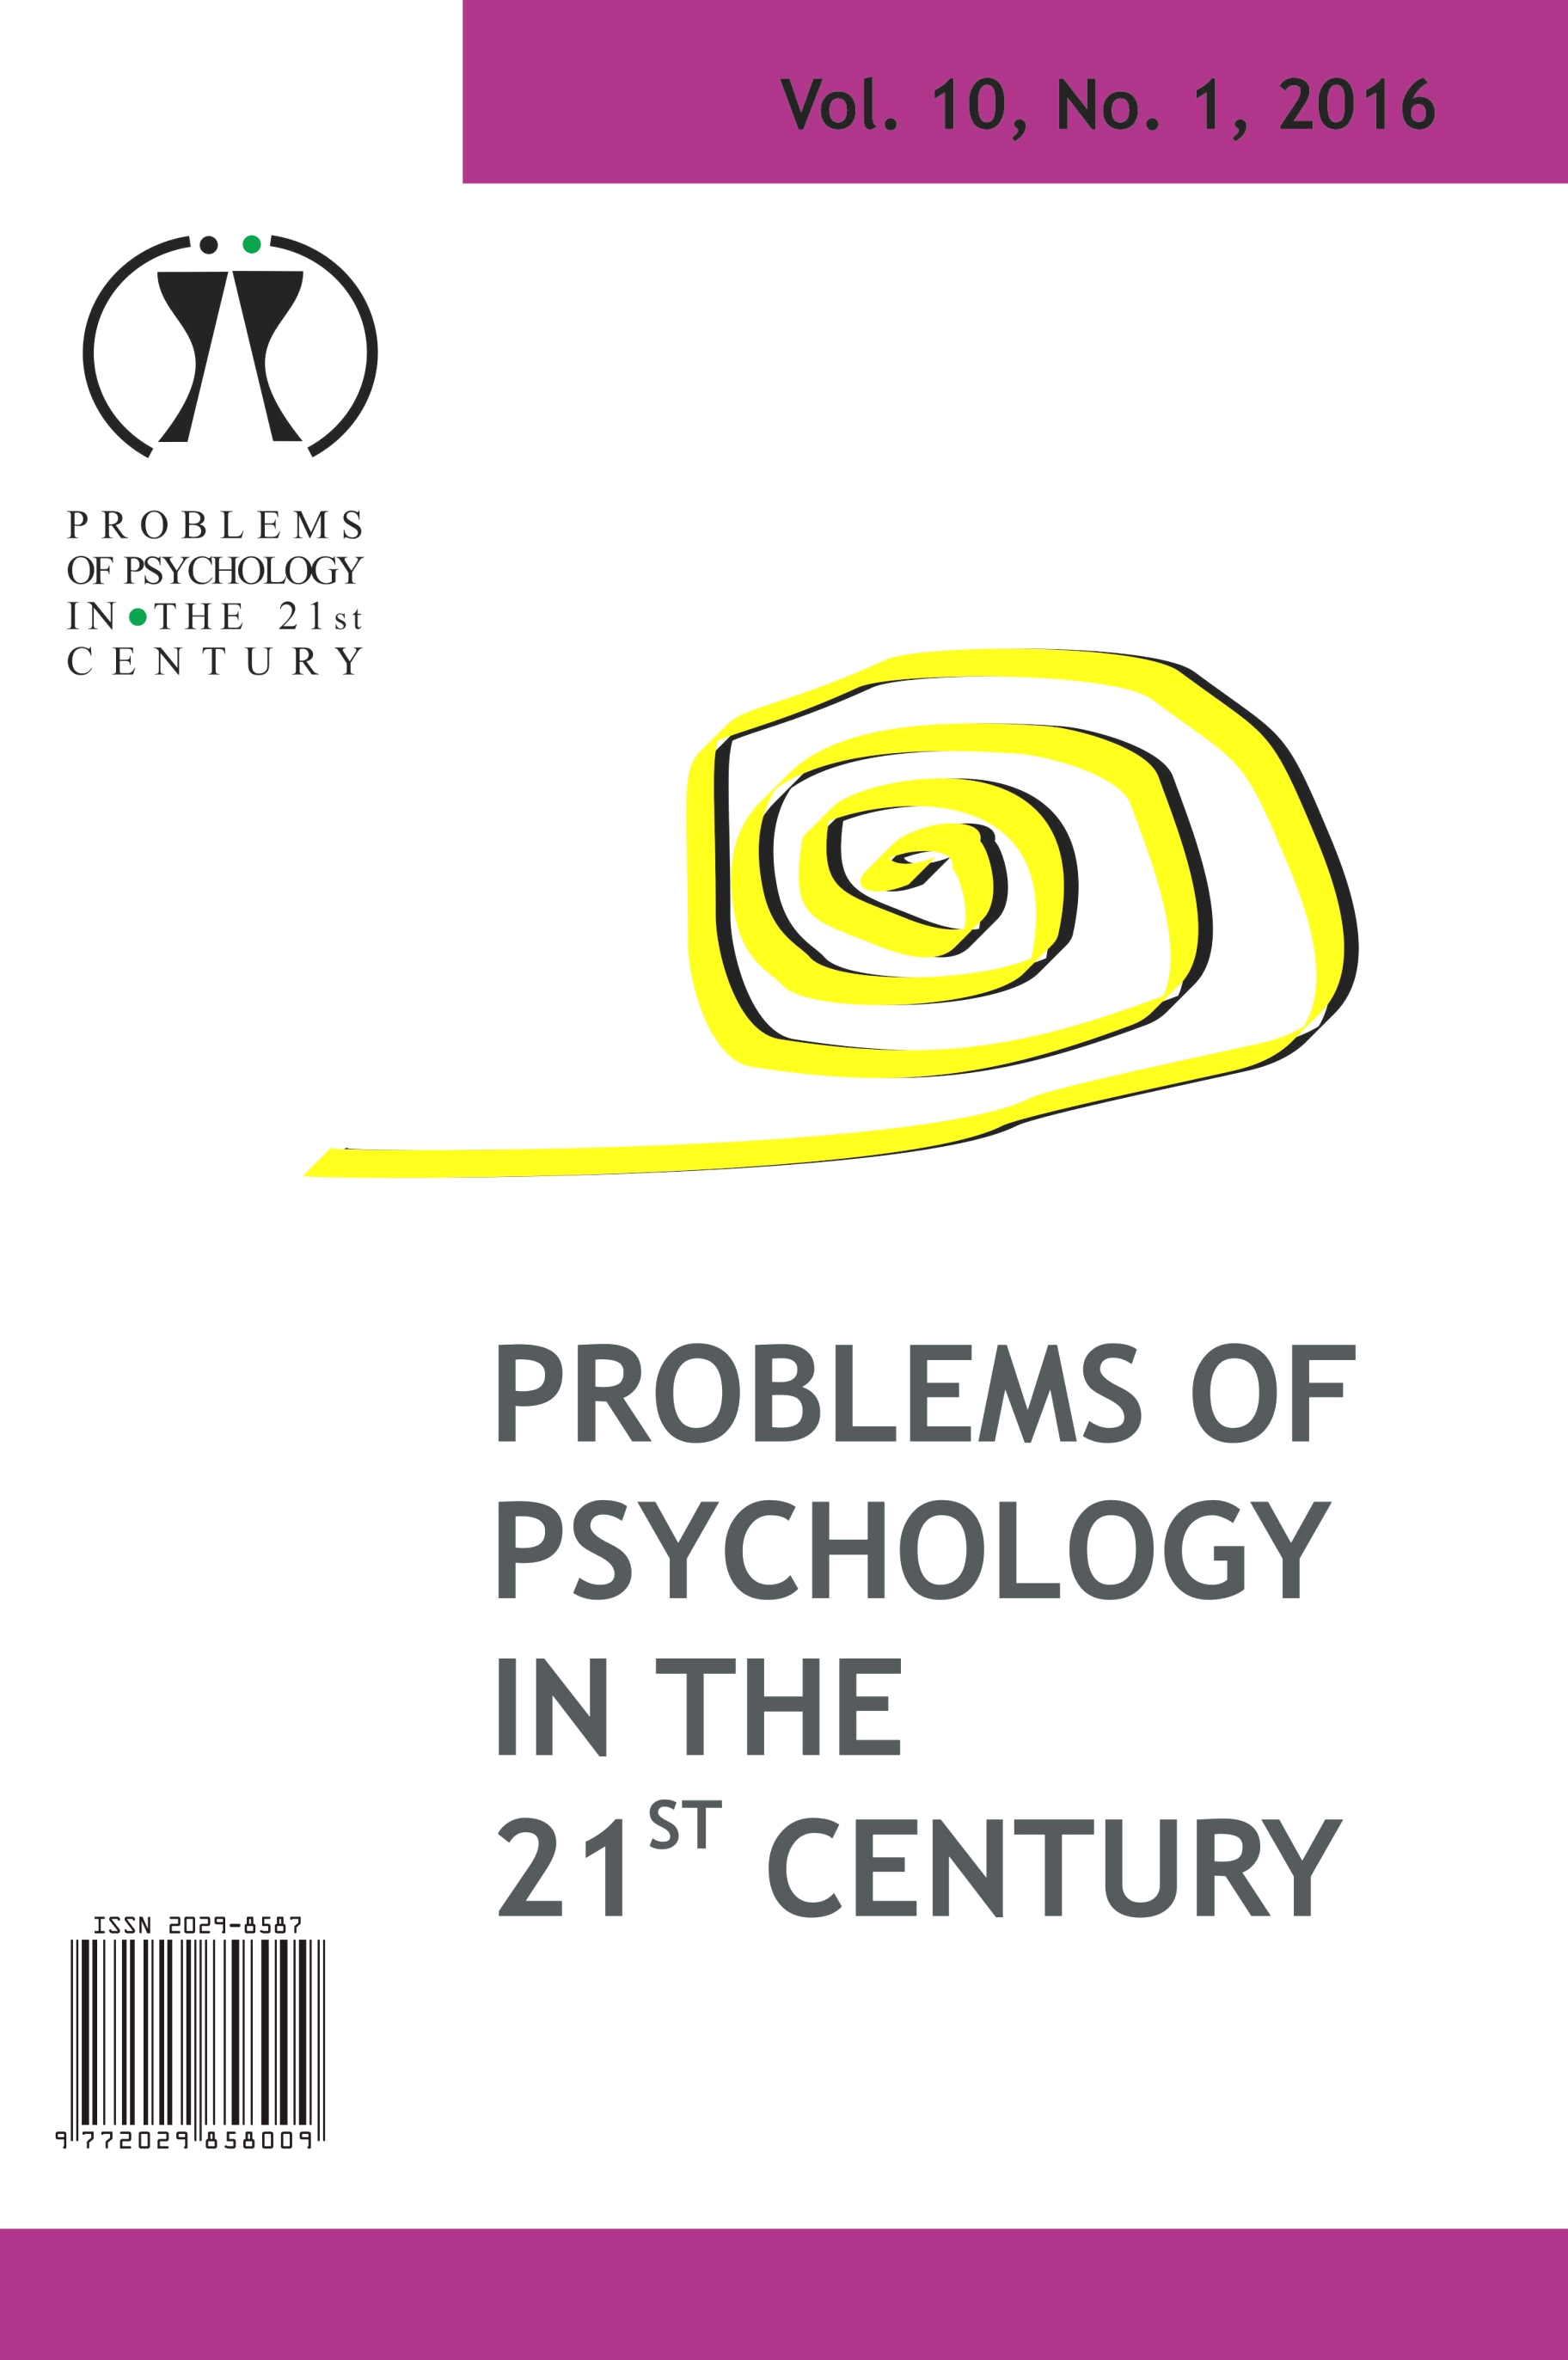 PSYCHOLOGICAL PECULIARITIES OF TOLERANCE OF UKRAINIAN AND POLISH STUDENTS: A COMPARATIVE ANALYSIS